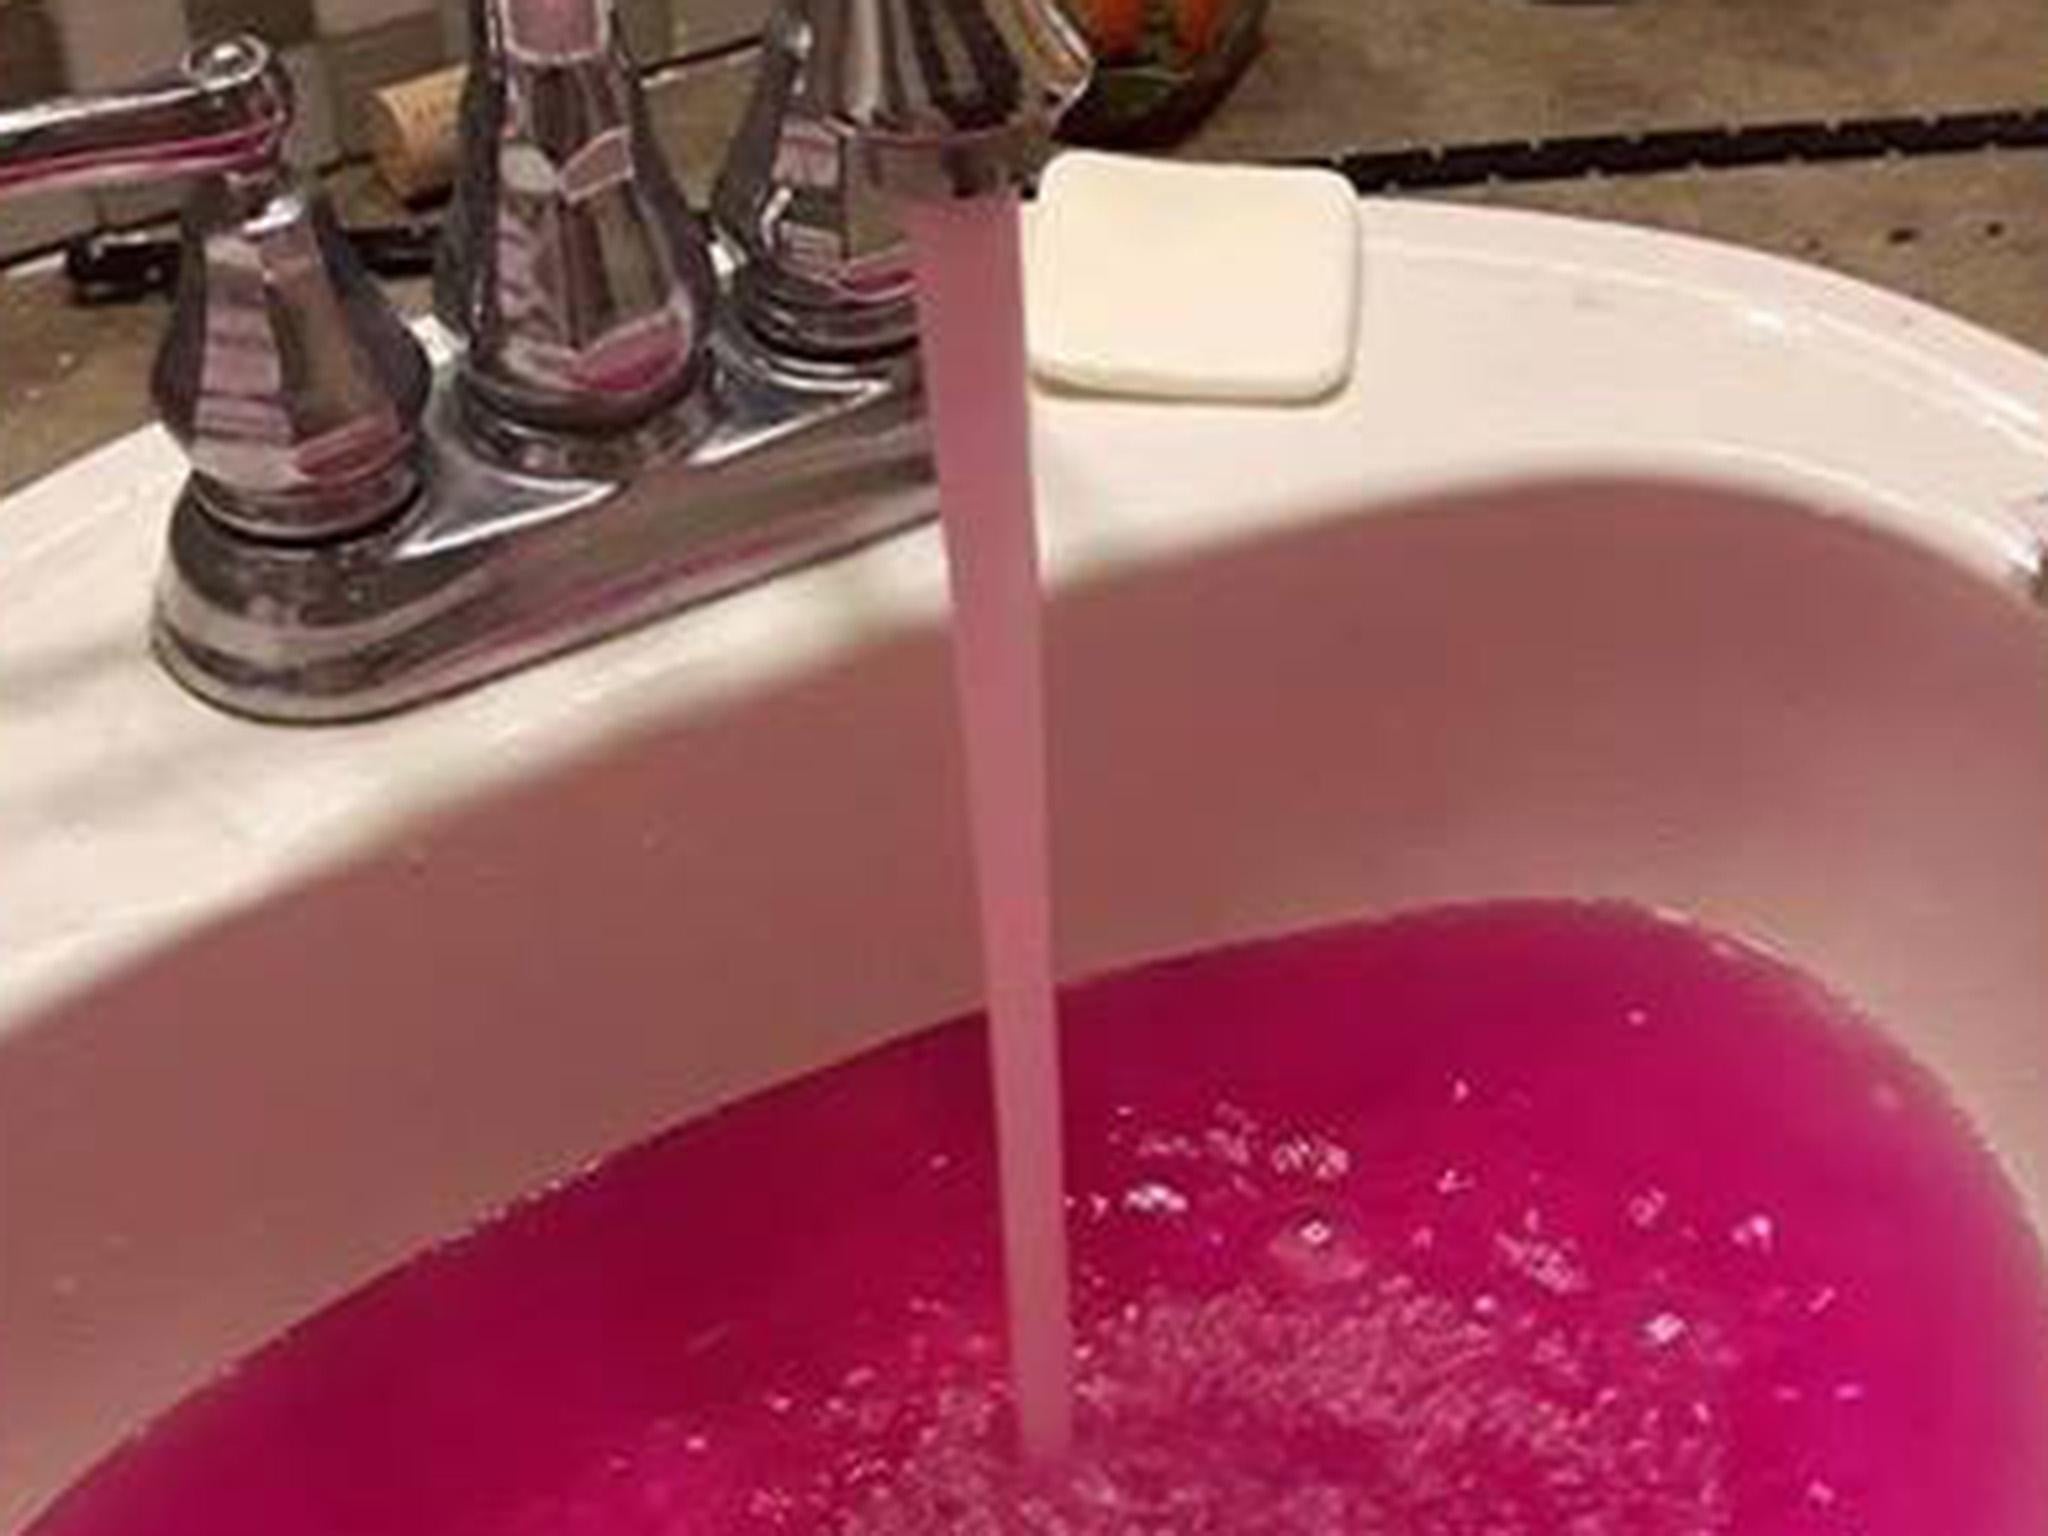 Water turns pink in Canadian town - Mayor forced to apologise | The